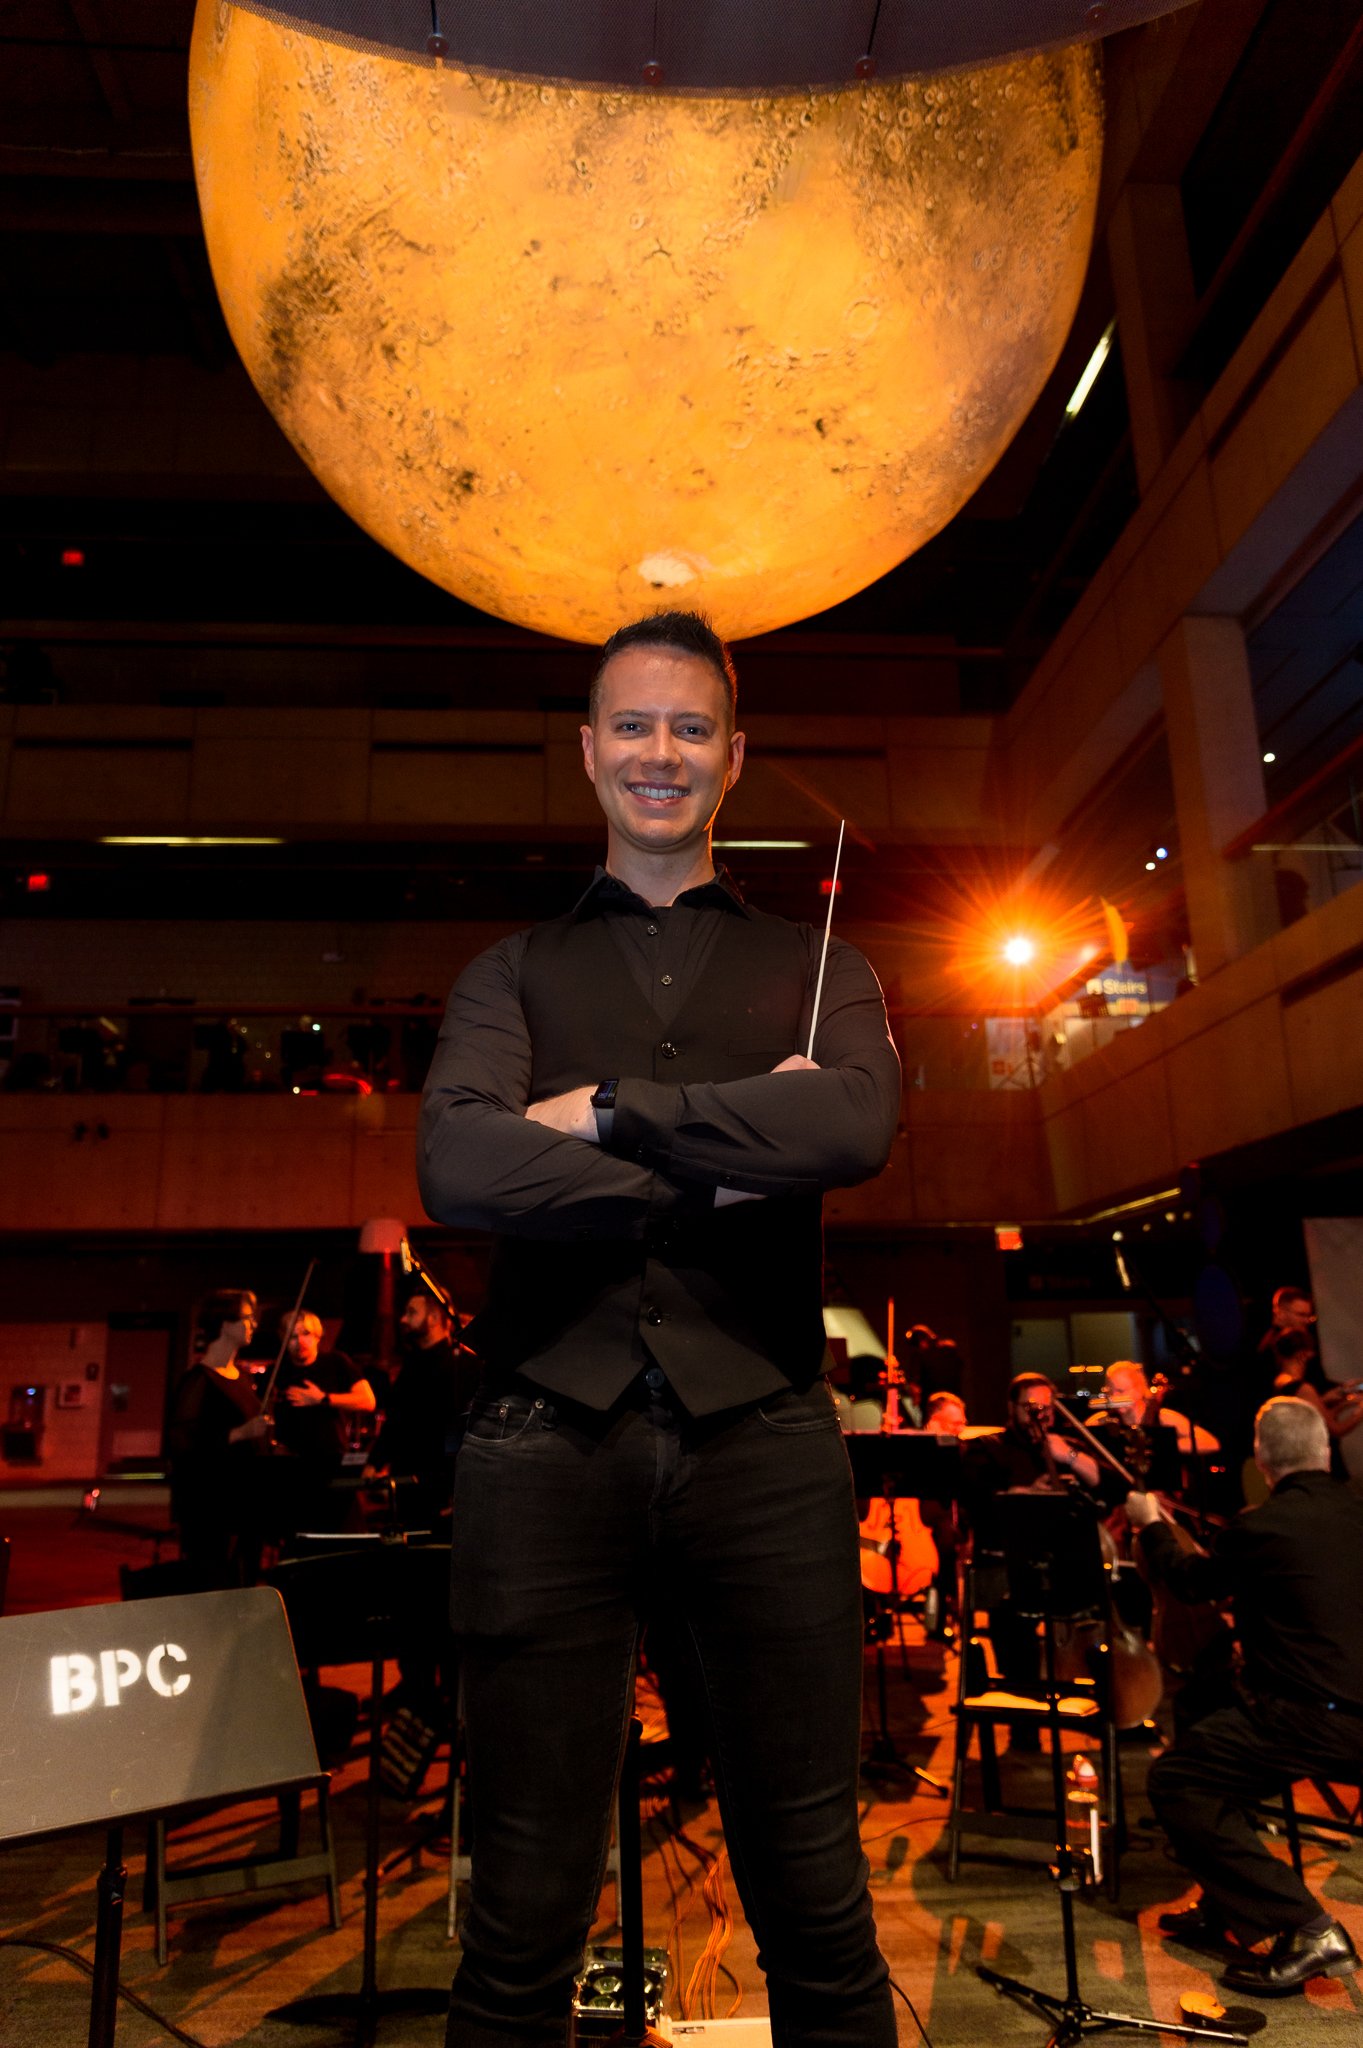 Brendan Kenney, conductor of the Firebird Pops Orchestra